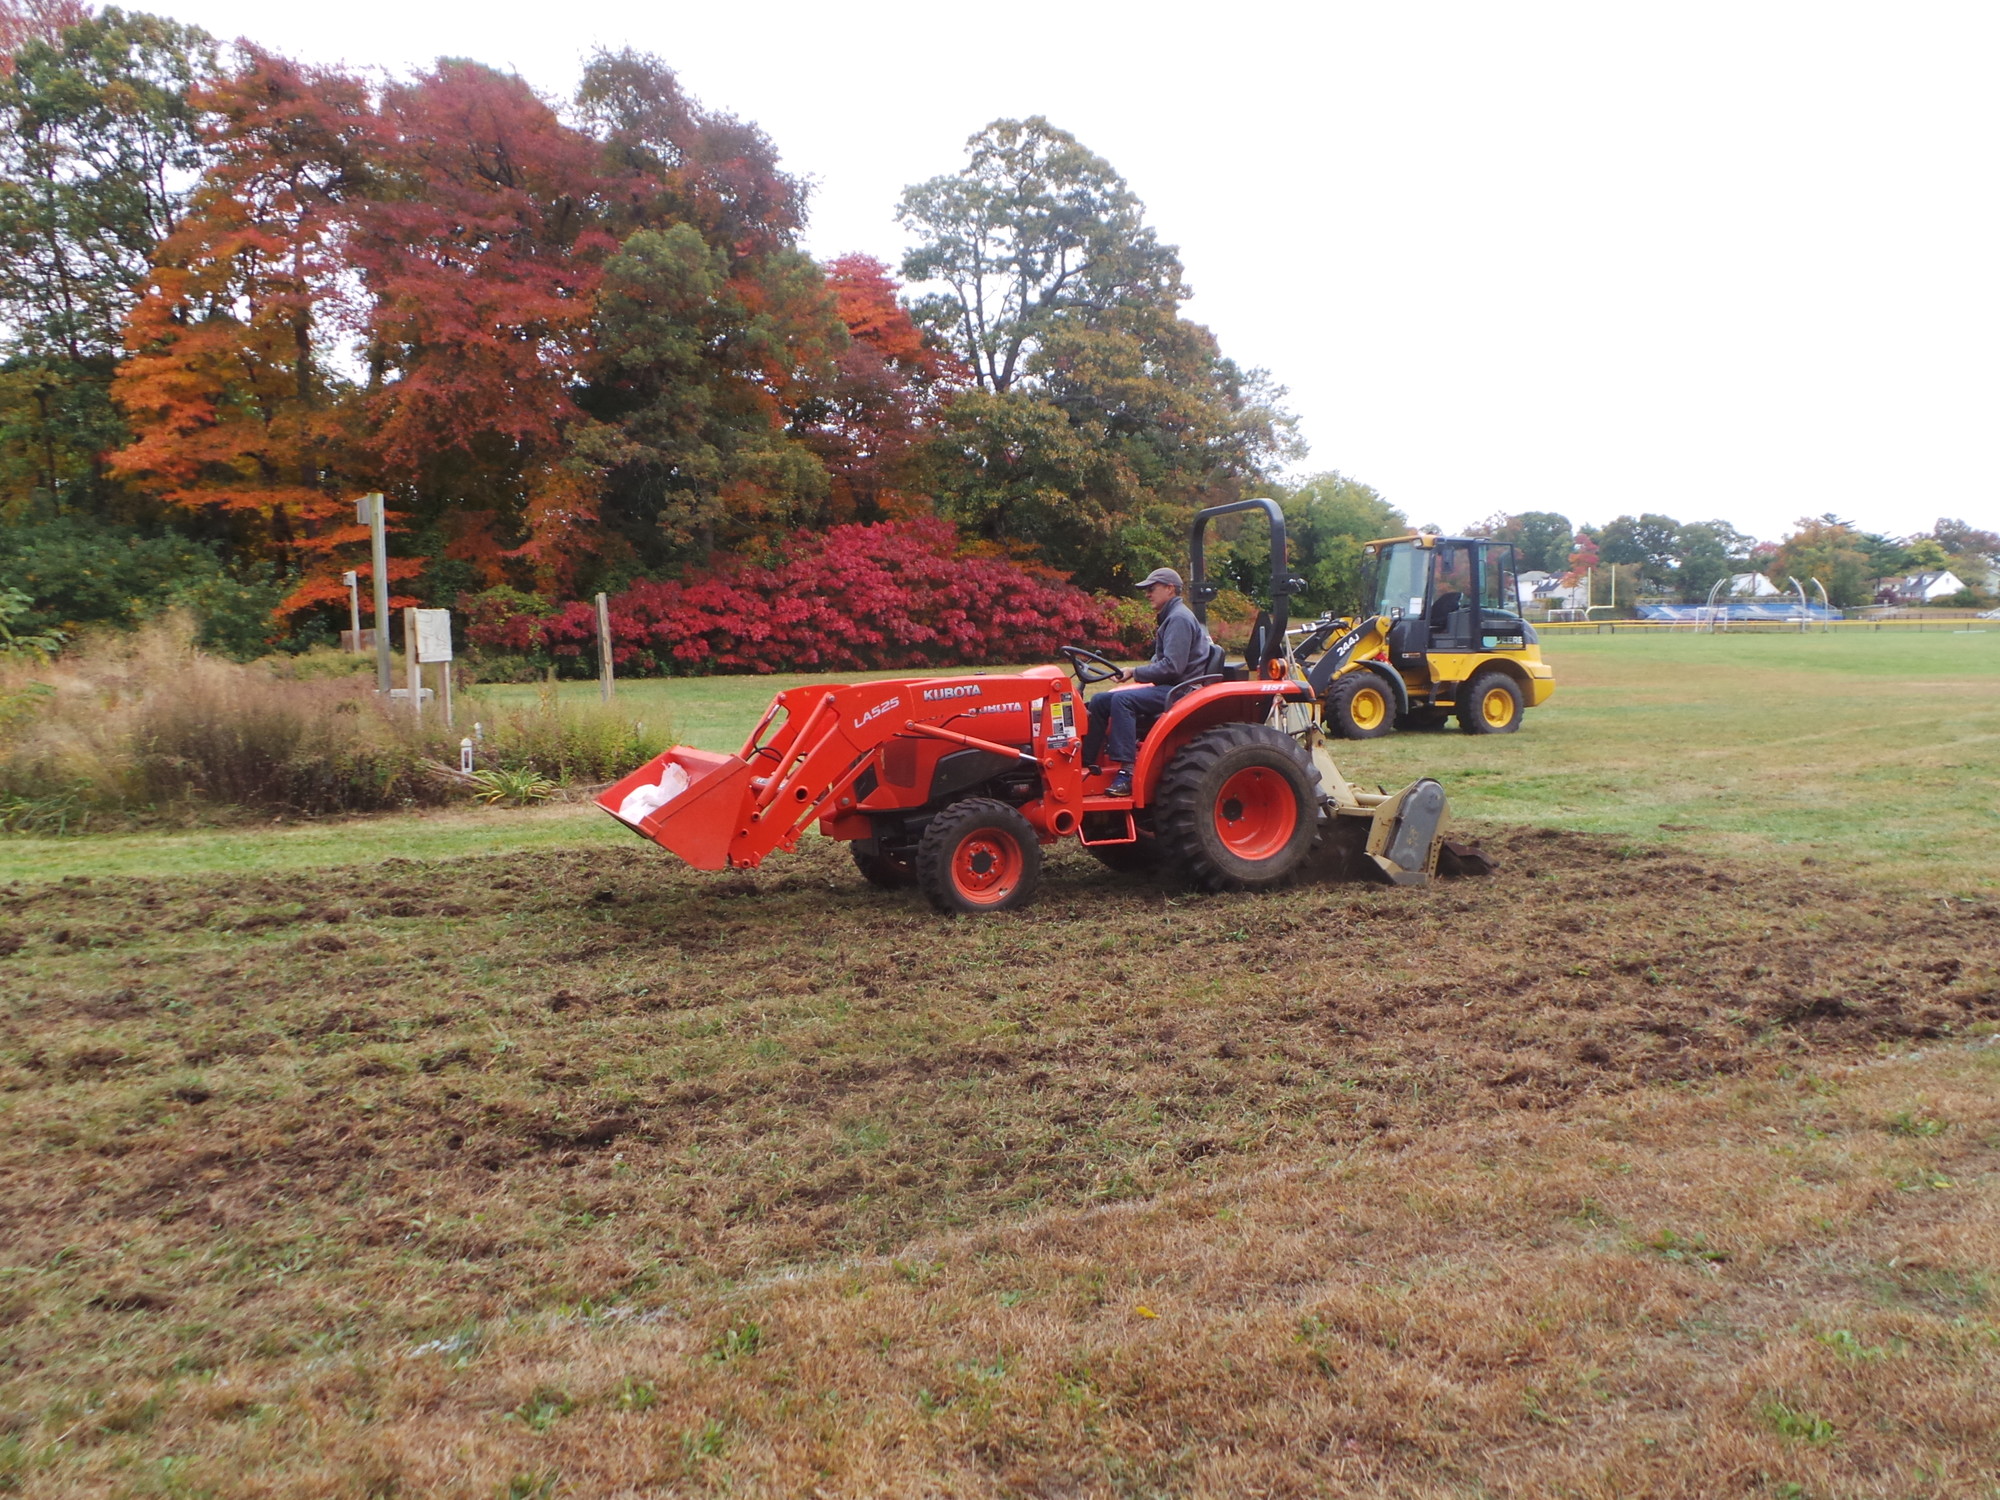 Rick White tilled the soil to facilitate germination of winter rye seeds.